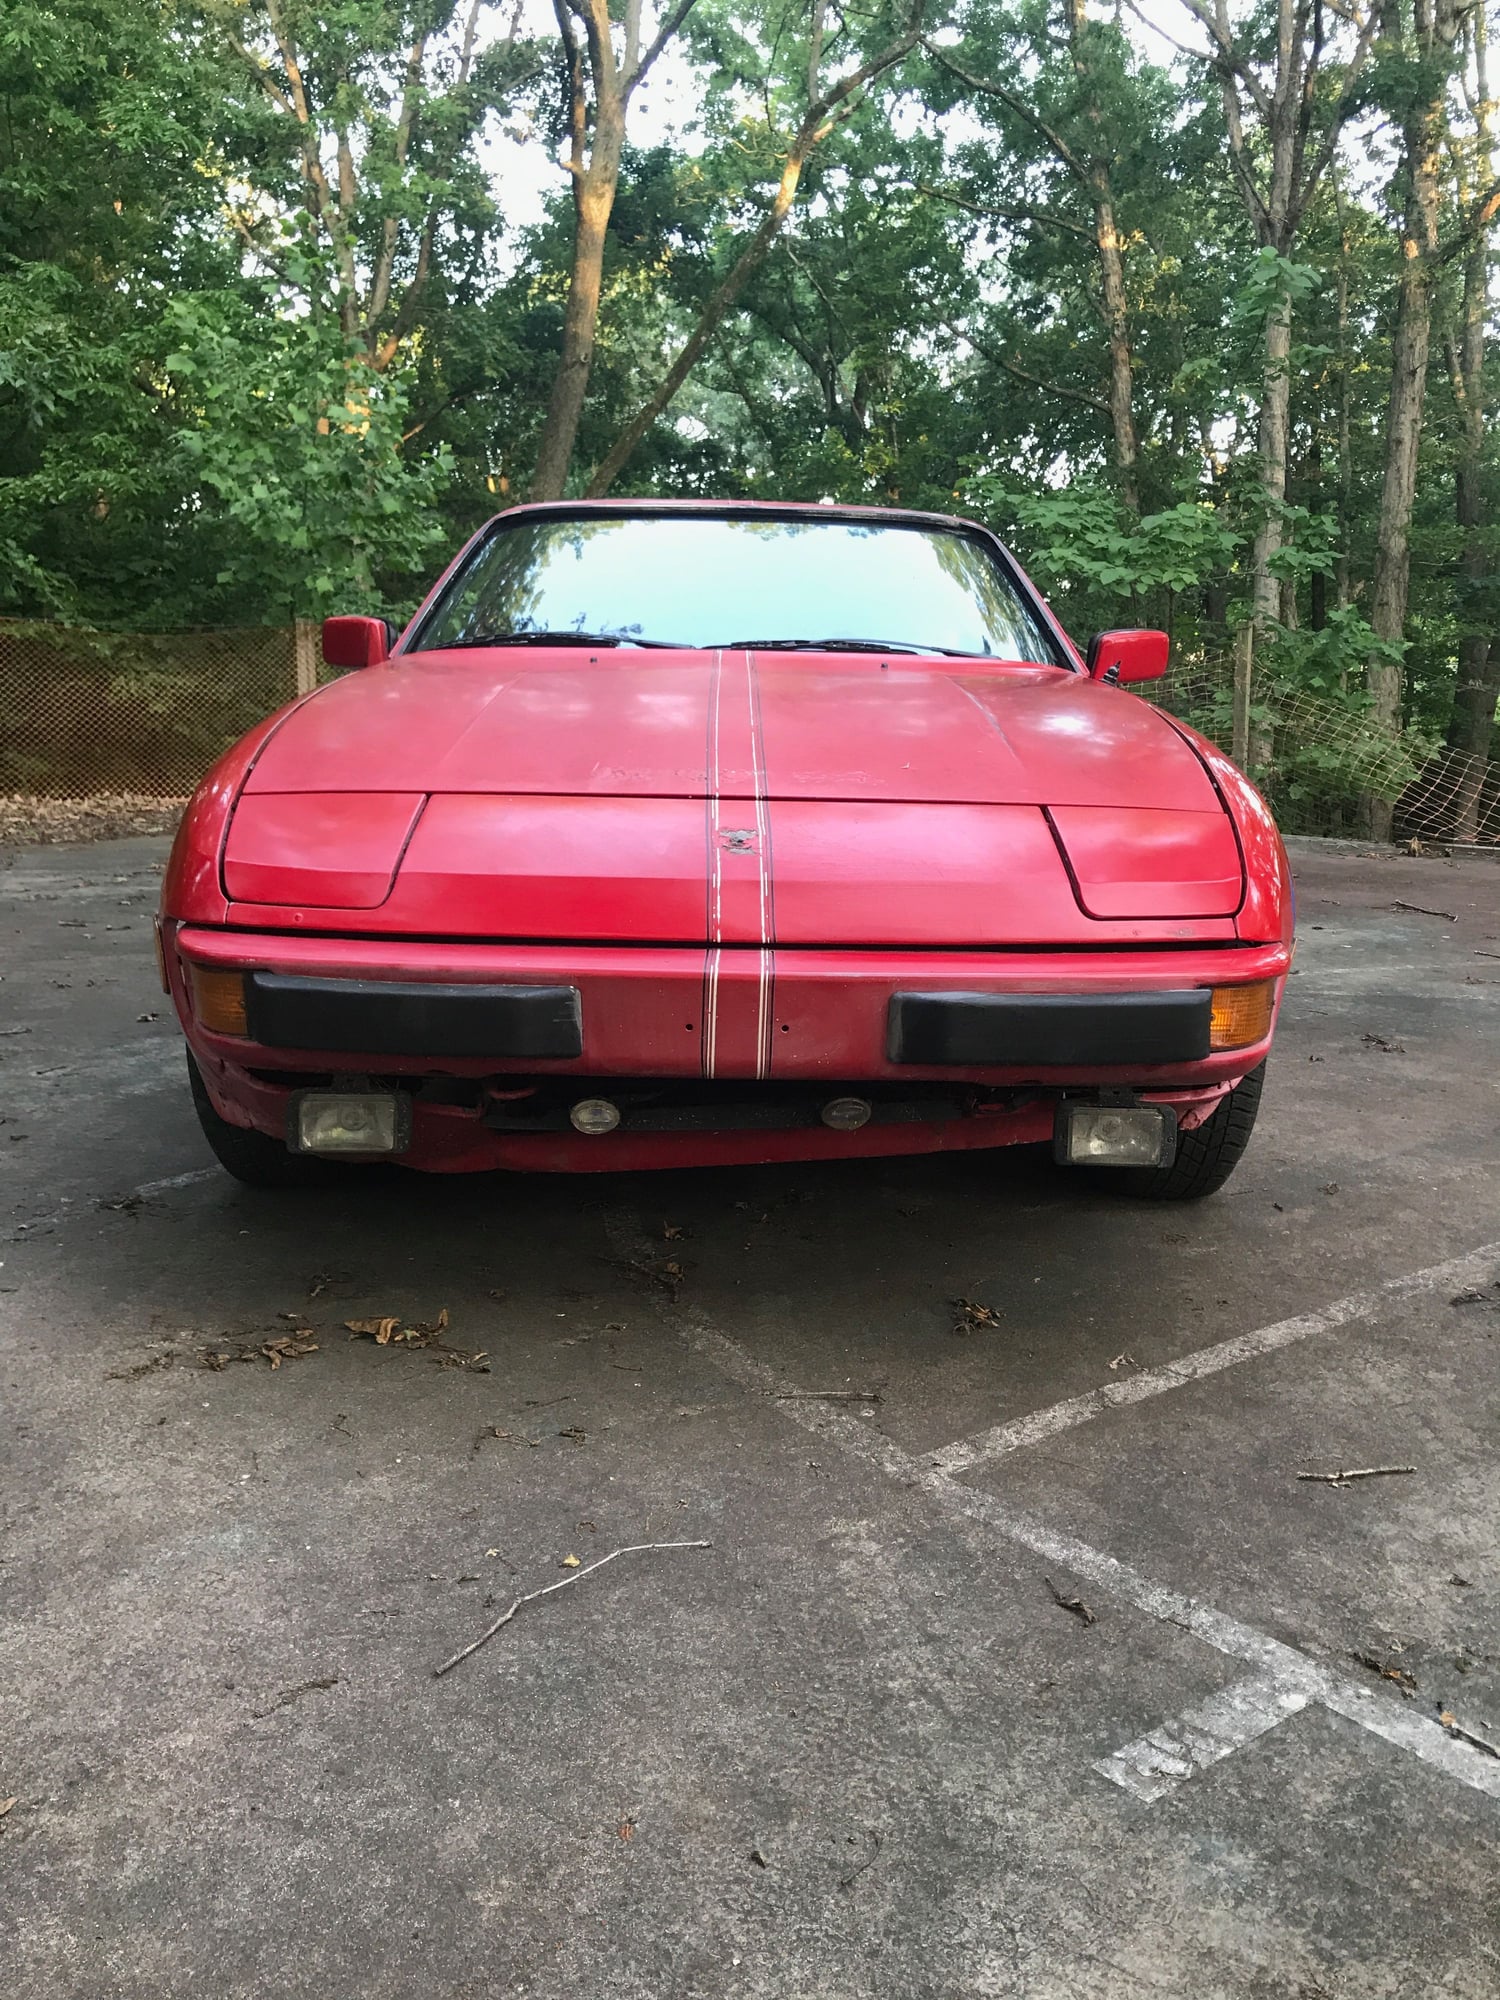 1979 Porsche 924 - 79 Porsche 924 Sebring - Used - VIN 9249206944 - 127,141 Miles - 4 cyl - 2WD - Manual - Coupe - Red - Rogers, AR 72756, United States